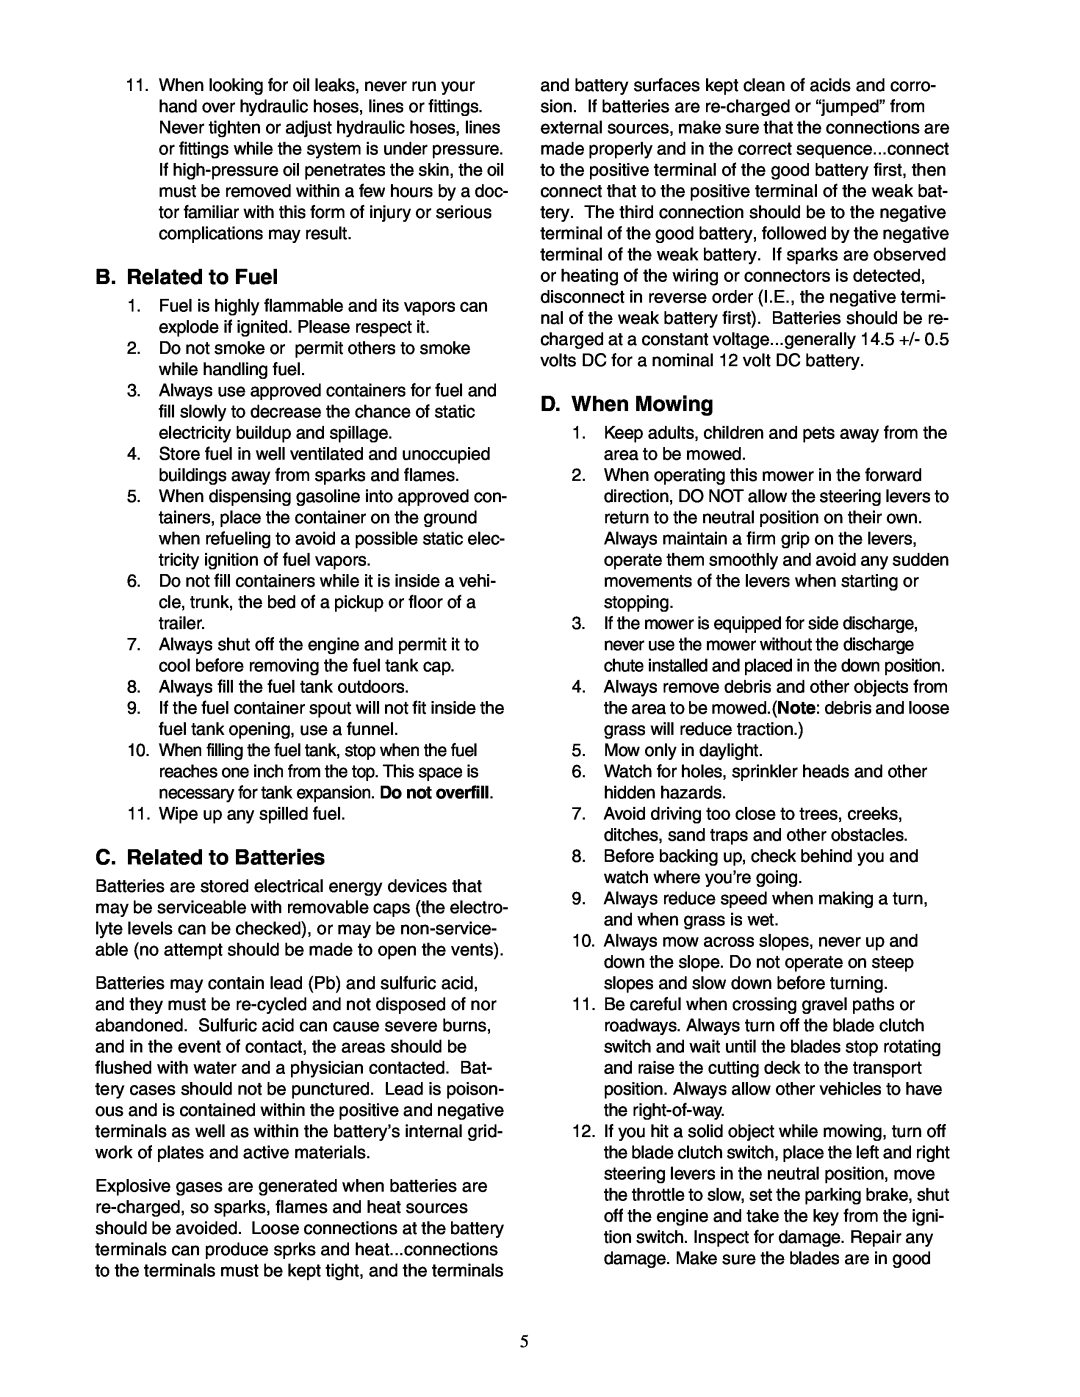 Cub Cadet 48-inch/54-inch/60-inch/72-inch service manual B. Related to Fuel, C. Related to Batteries, D. When Mowing 